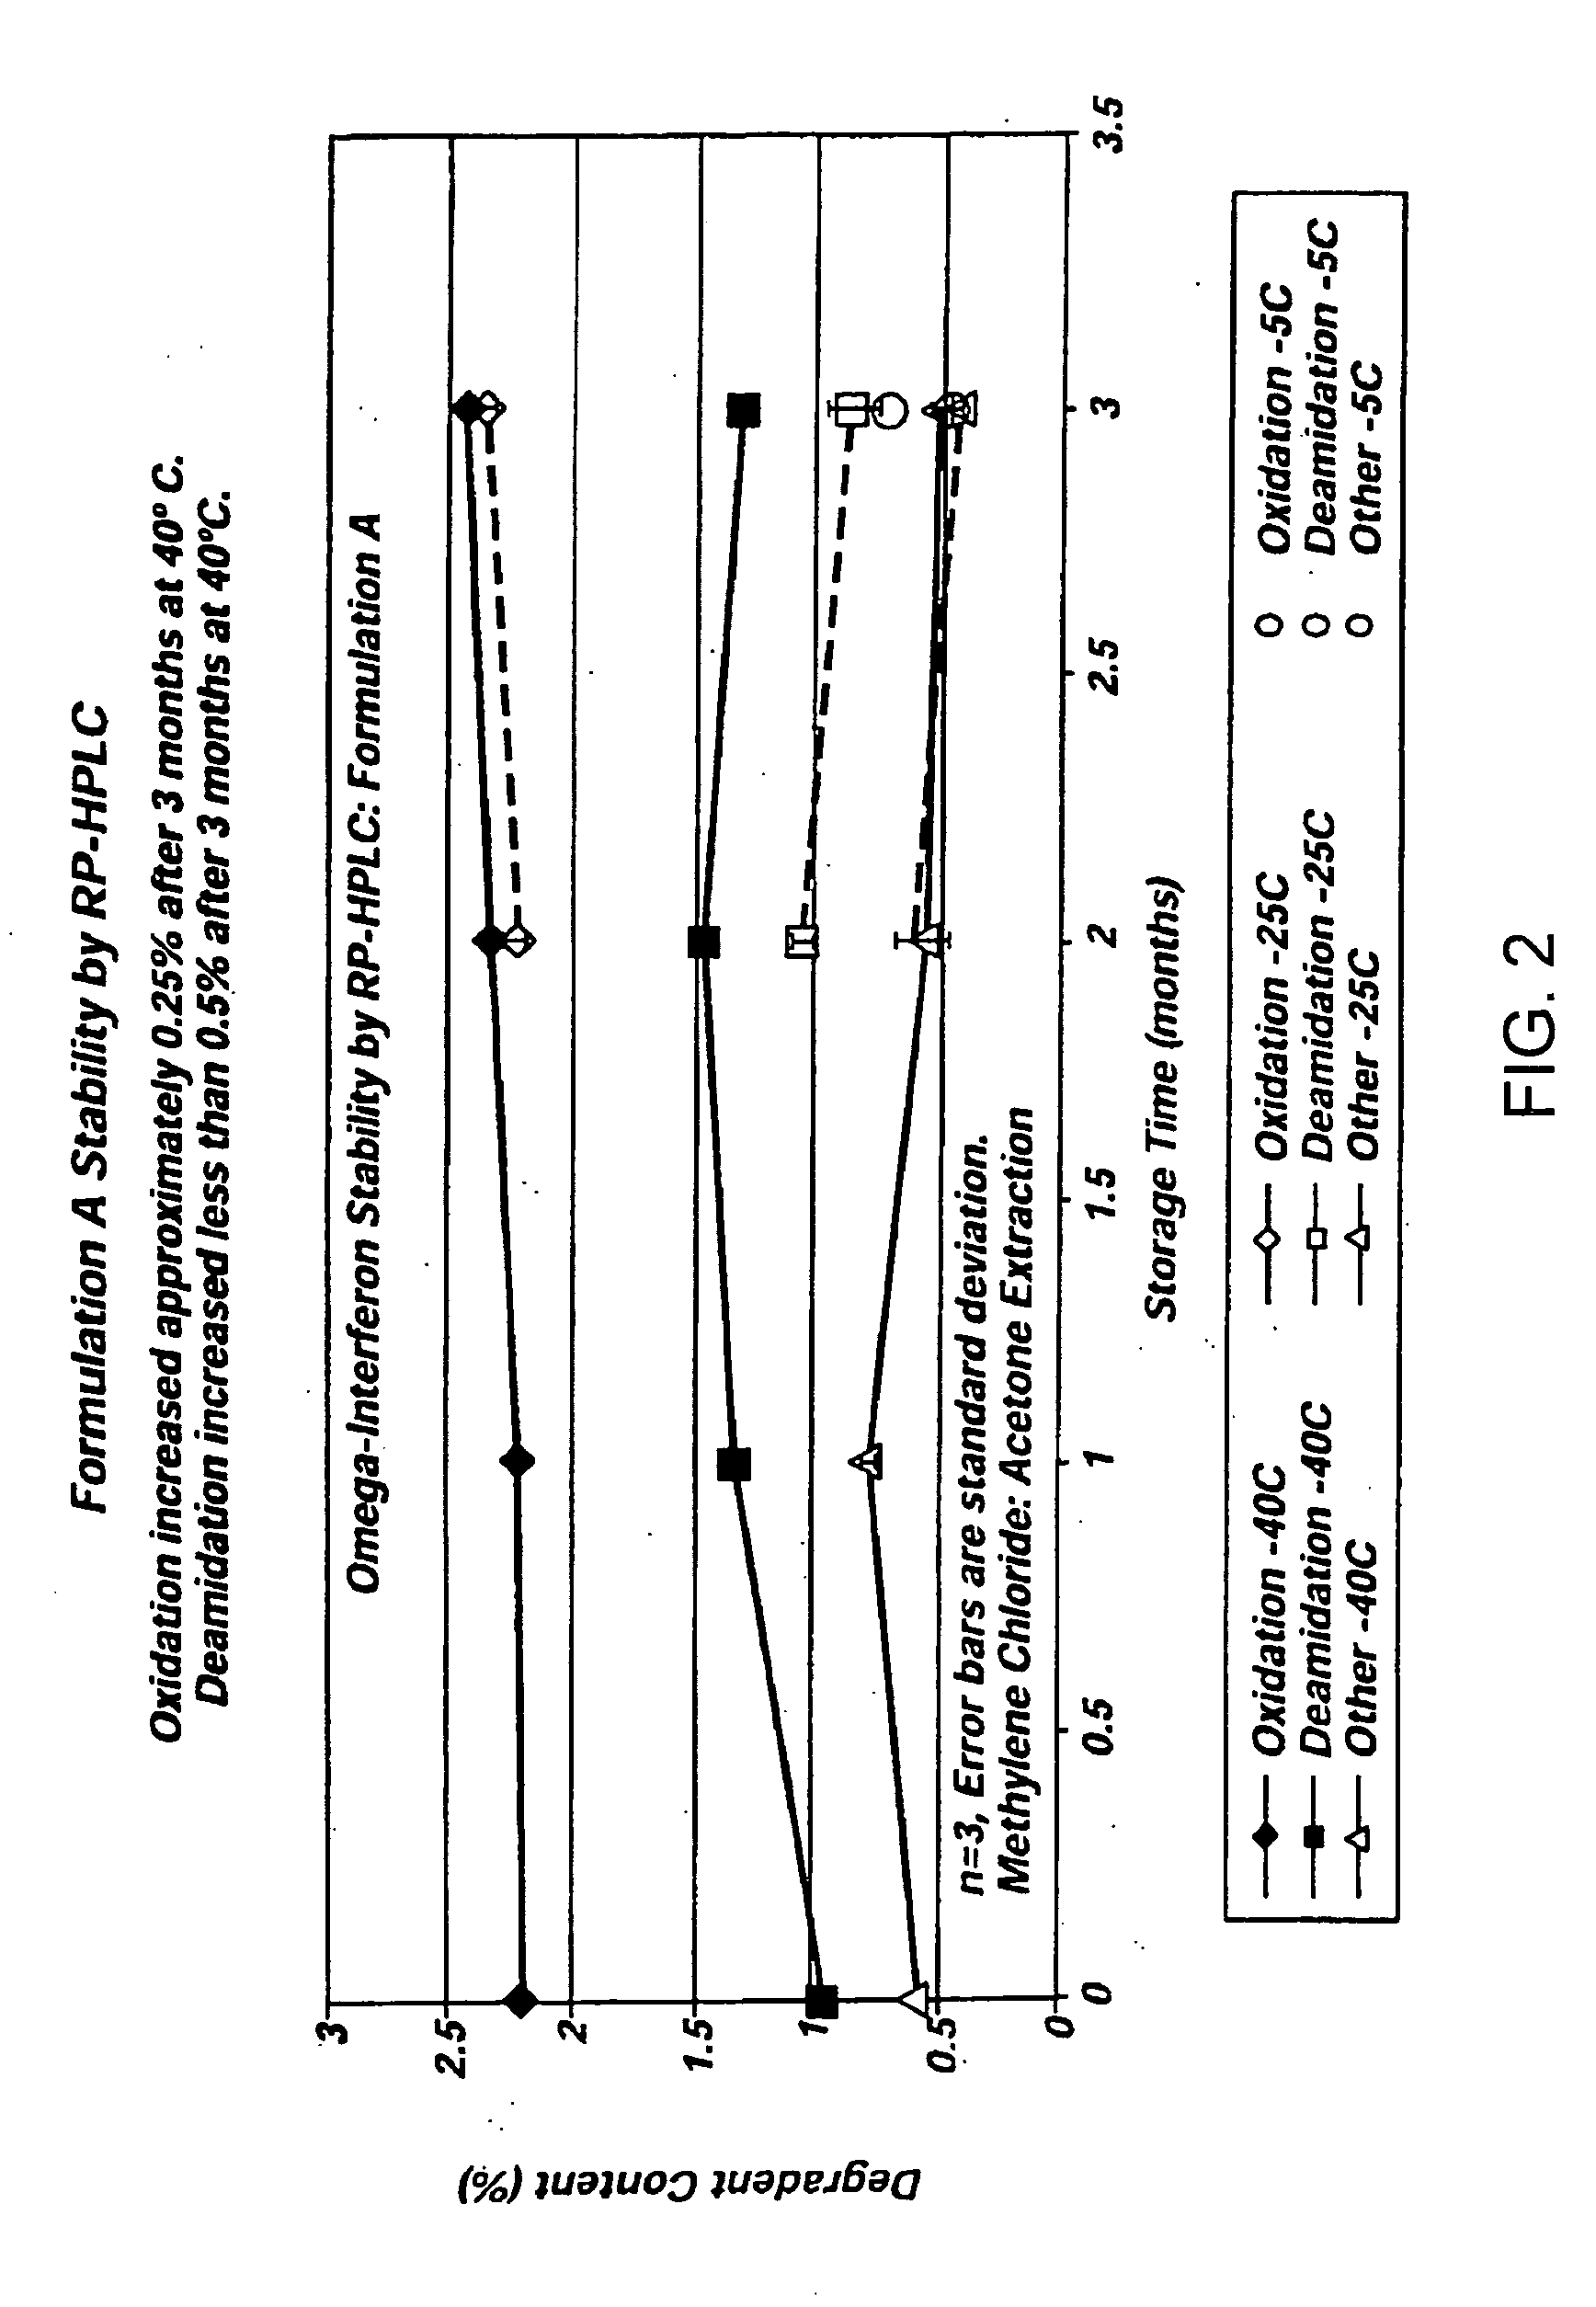 Non-aqueous single phase vehicles and formulations utilizing such vehicles